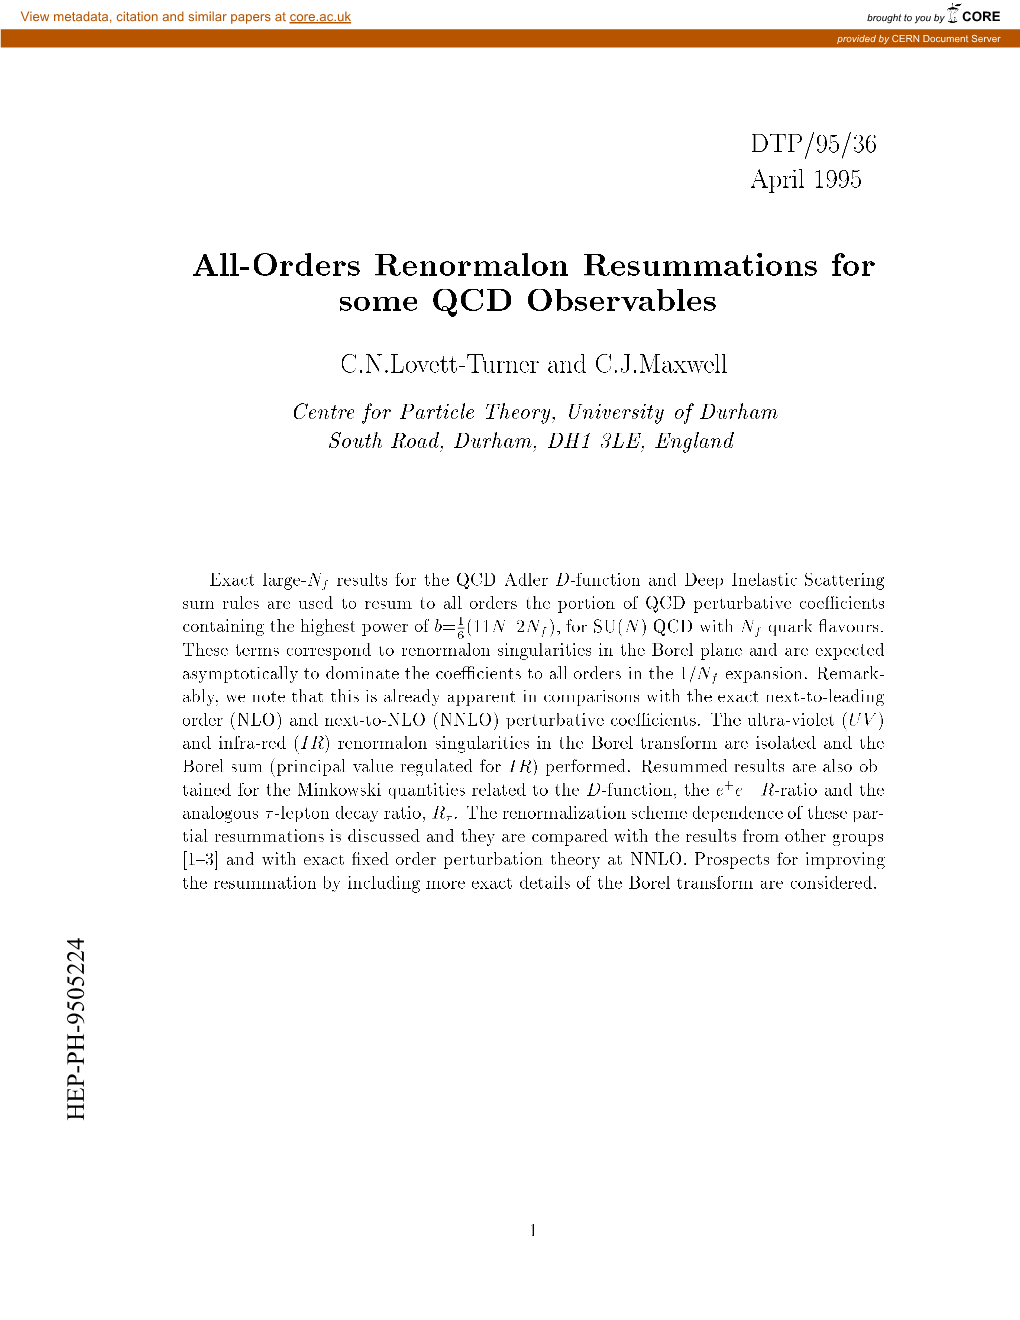 All-Orders Renormalon Resummations for Some QCD Observables